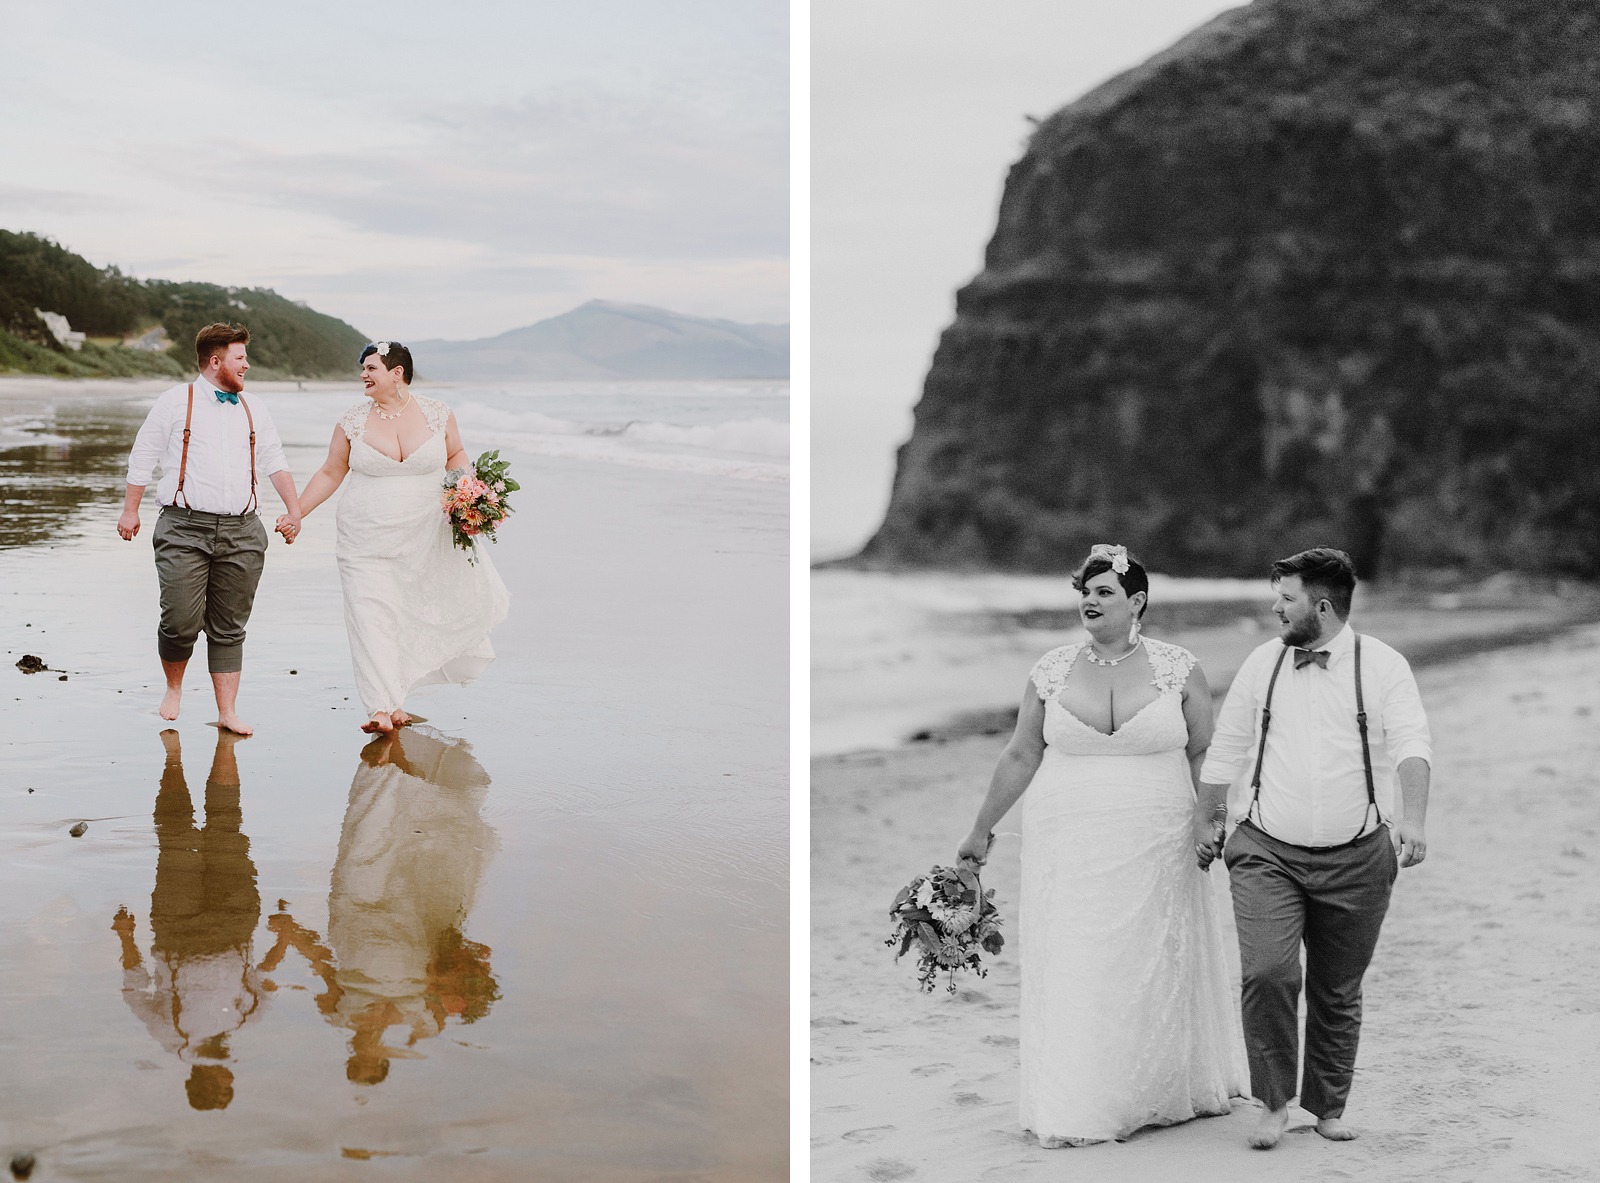 Portraits of the bride and groom walking down the beach at sunset - Oceanside Community Club Wedding” title=